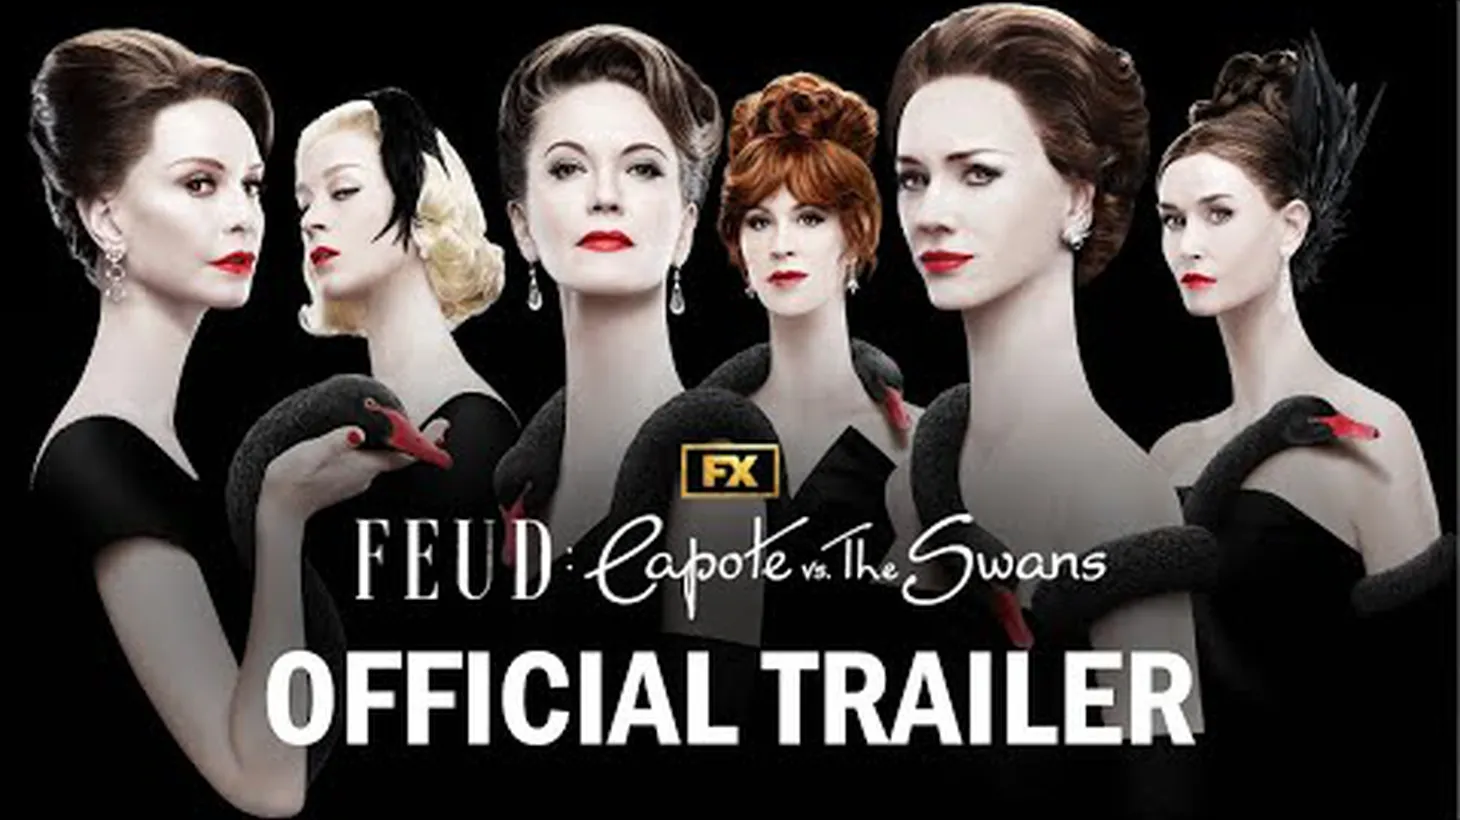 The limited series “Feud” centers on Truman Capote, who wrote “Breakfast at Tiffany’s” and “In Cold Blood,” plus his relationship with the “The Swans” in New York.